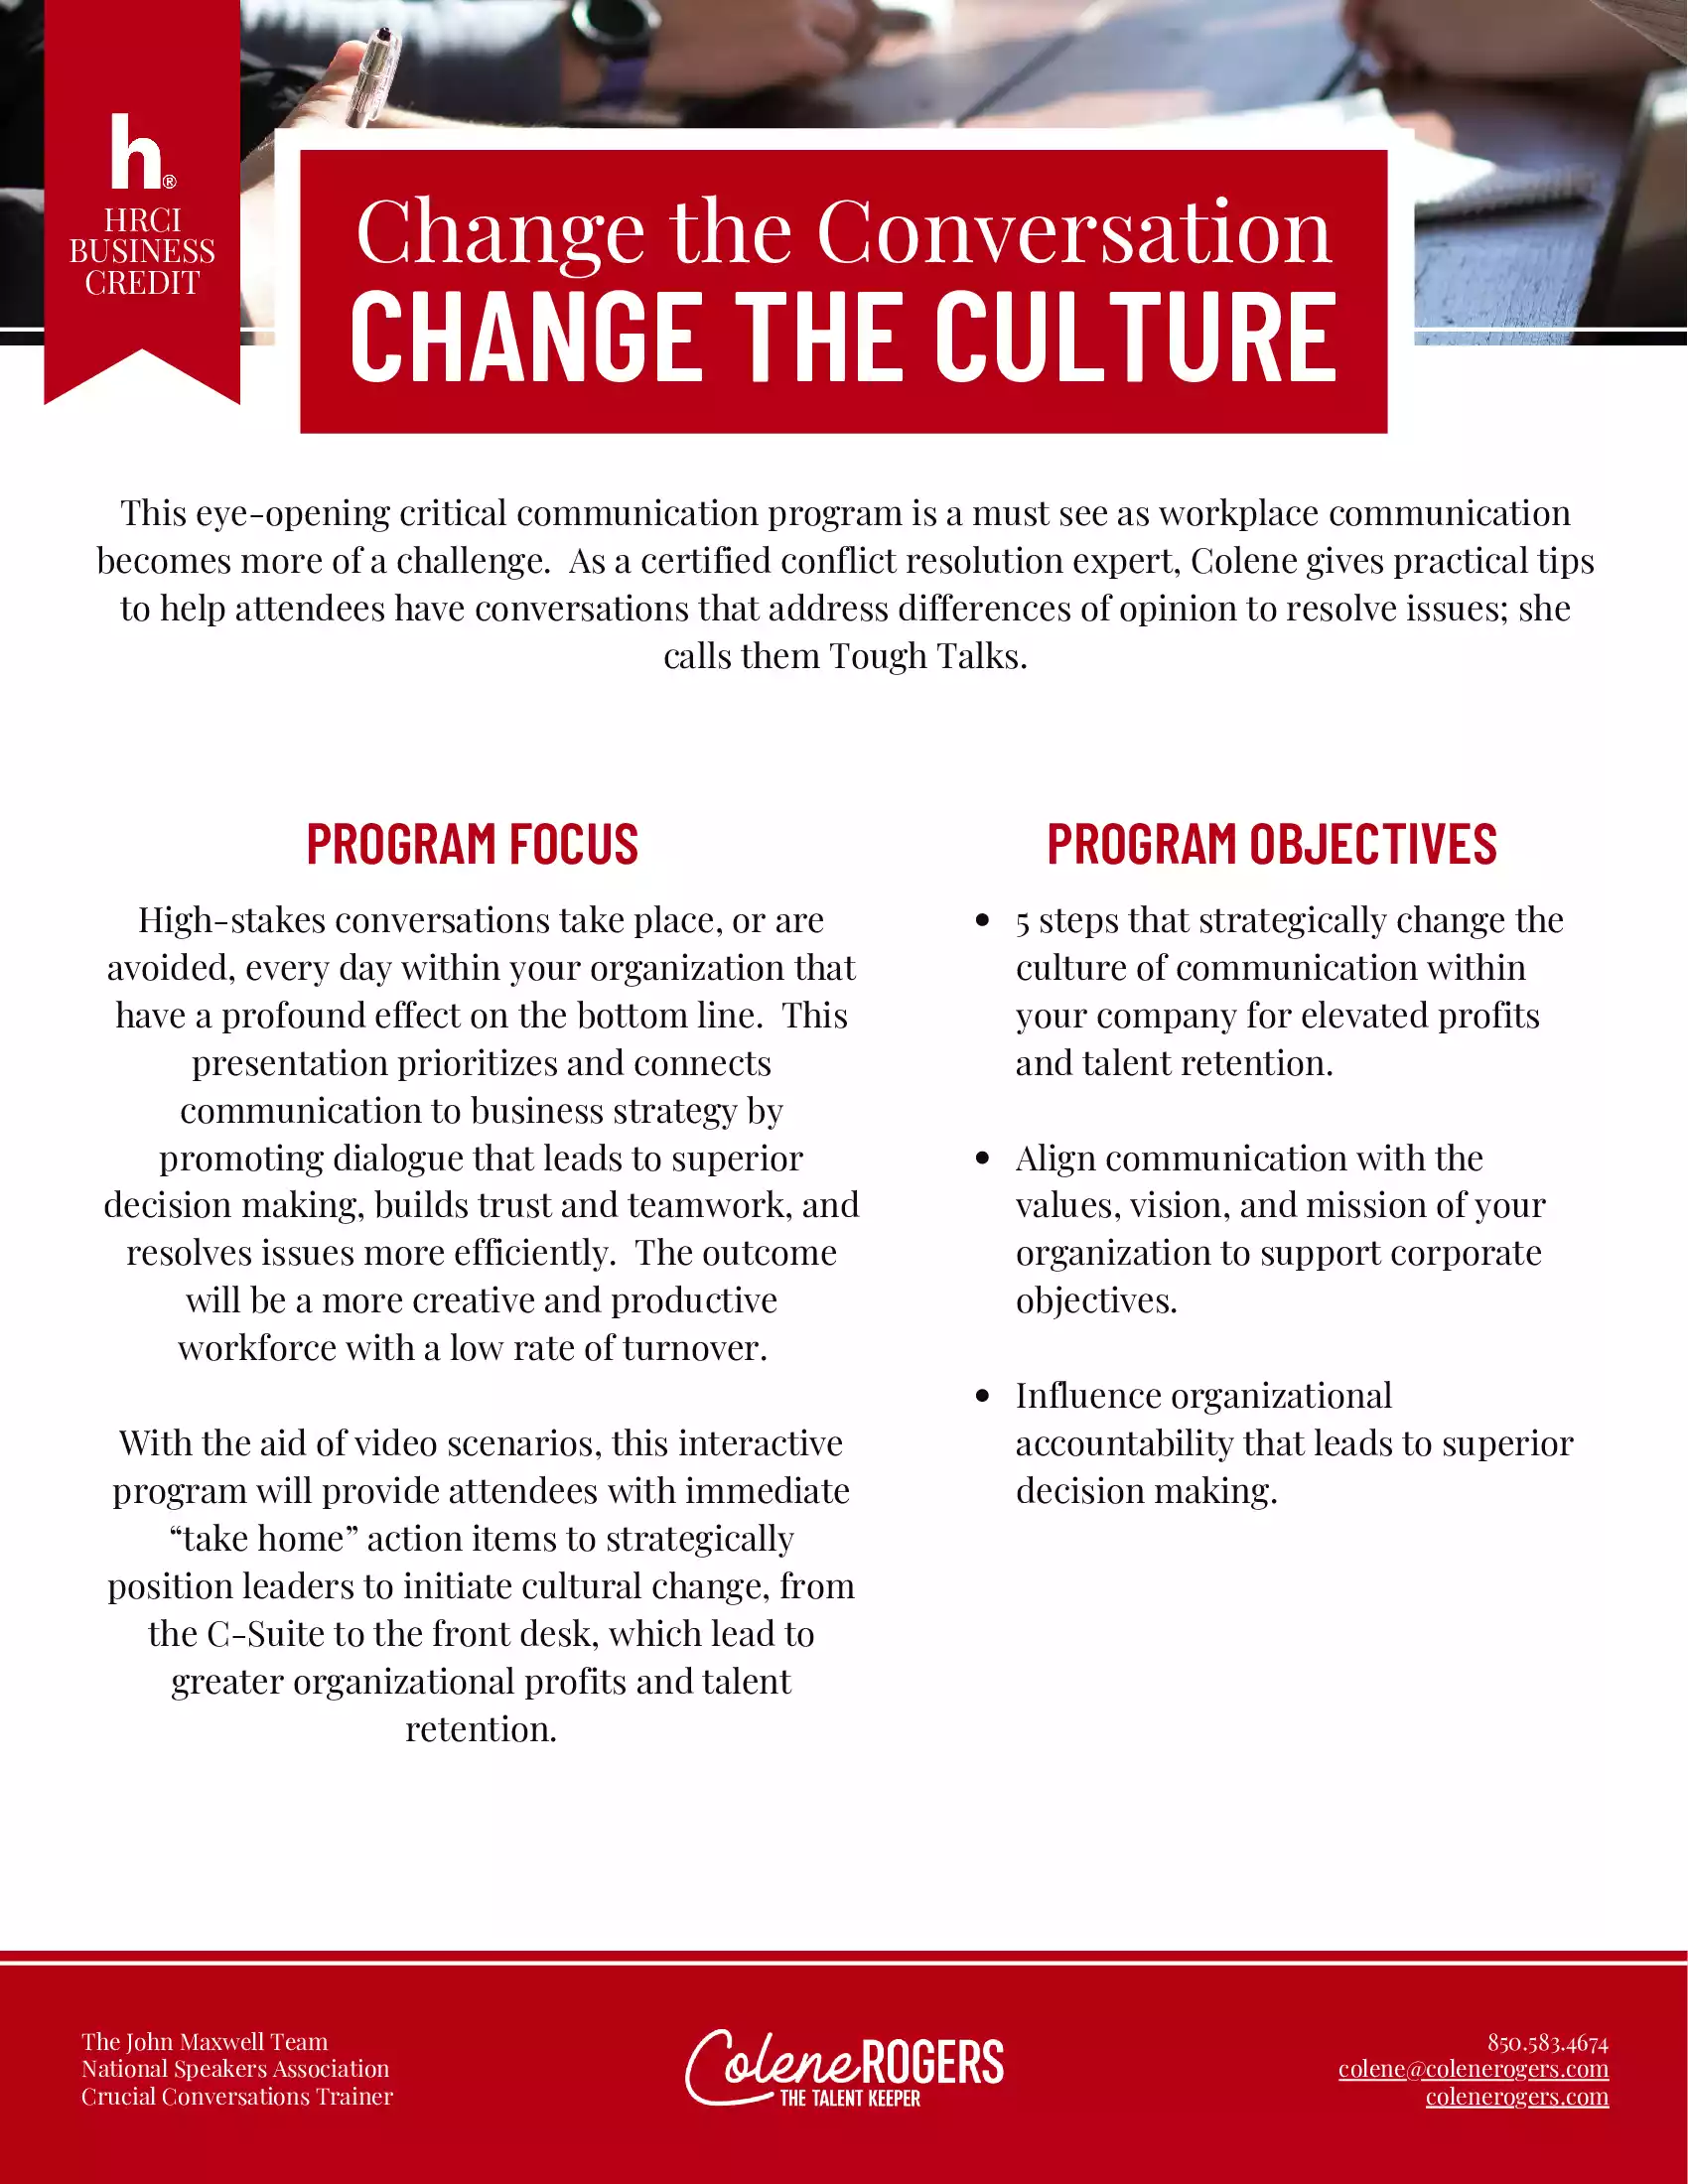 Preview Of The Change The Conversation Keynote Info Sheet, Download Below